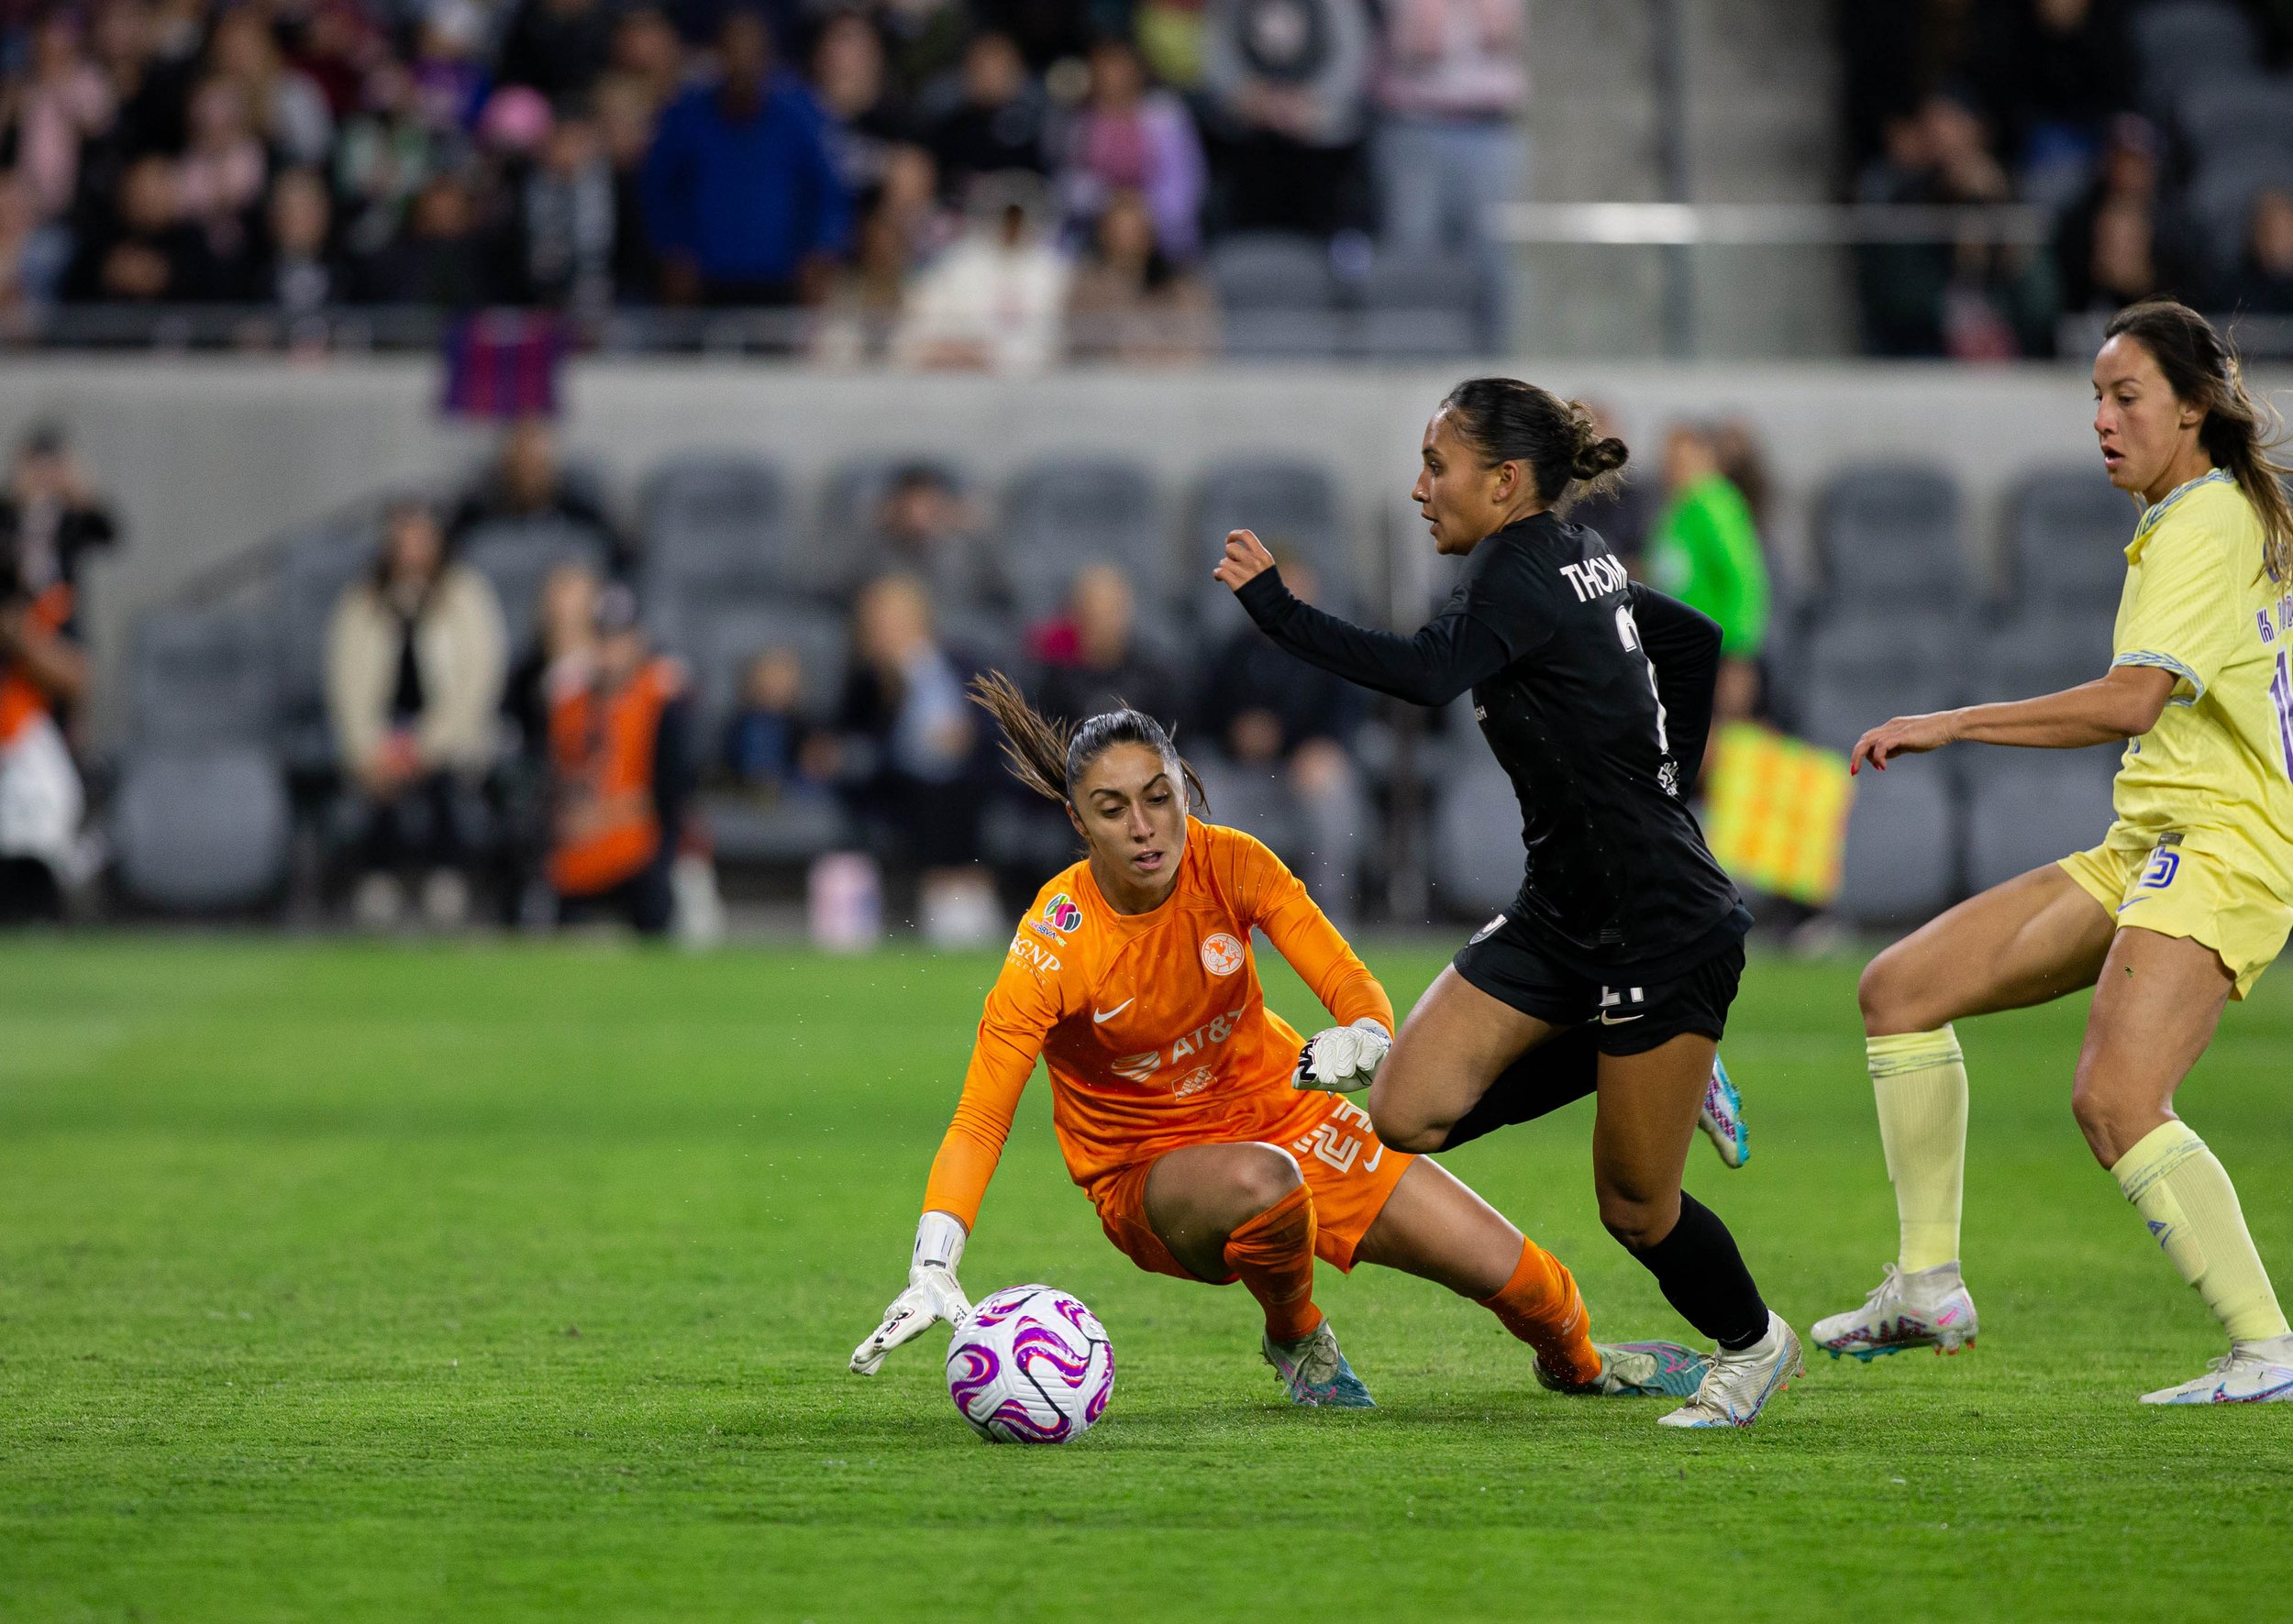  Angel City Football Club forward, Alyssa Thompson (21) dribbles past Club America Femenil goalkeepr, Itzel Gonzalez allwoing Thompson to tap in th eball for the first goal of the game on Wed. March 8, 2023 at BMO Stadium in Los Angeles, Calif. (Dani